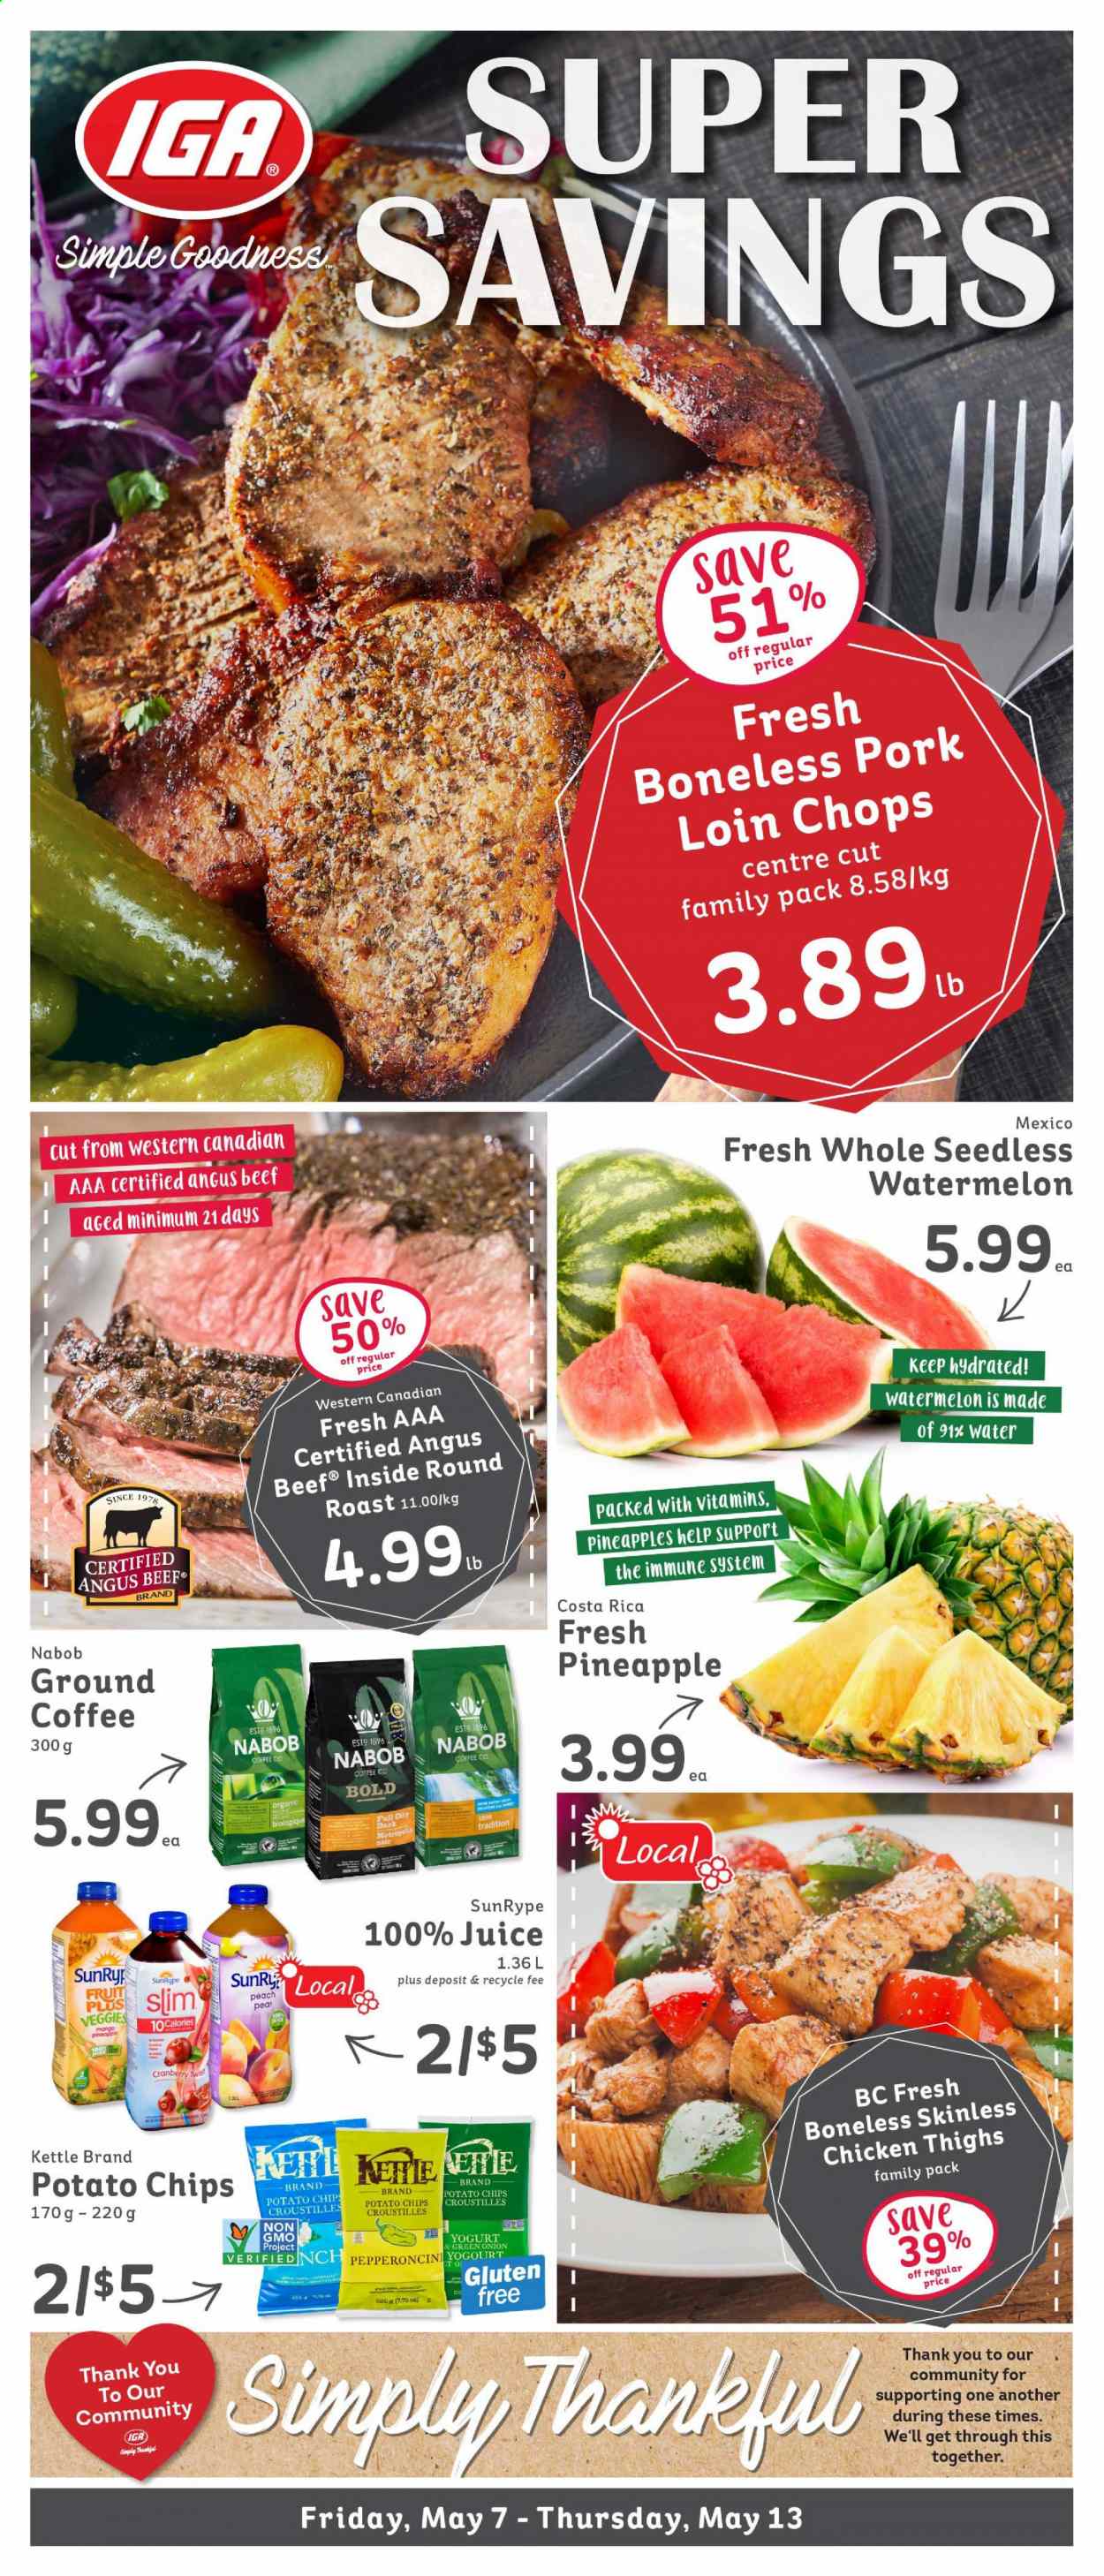 thumbnail - IGA Simple Goodness Flyer - May 07, 2021 - May 13, 2021 - Sales products - onion, green onion, watermelon, pineapple, pears, yoghurt, potato chips, juice, coffee, ground coffee, chicken thighs, chicken, beef meat, round roast, pork chops, pork loin, pork meat, chips. Page 1.